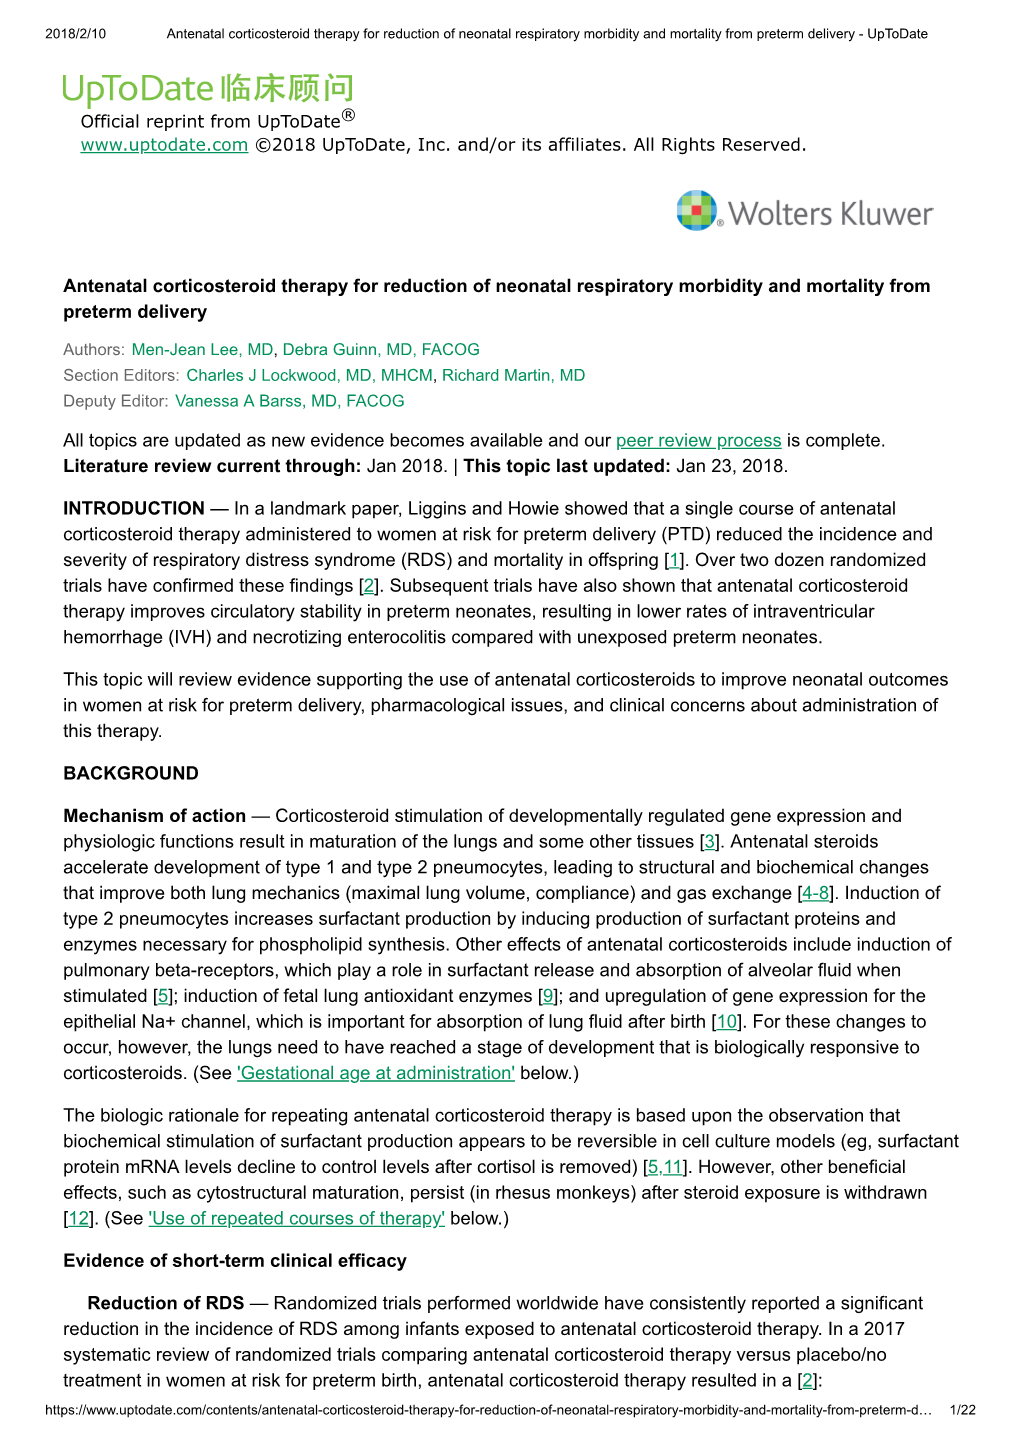 Antenatal Corticosteroid Therapy for Reduction of Neonatal Respiratory Morbidity and Mortality from Preterm Delivery - Uptodate